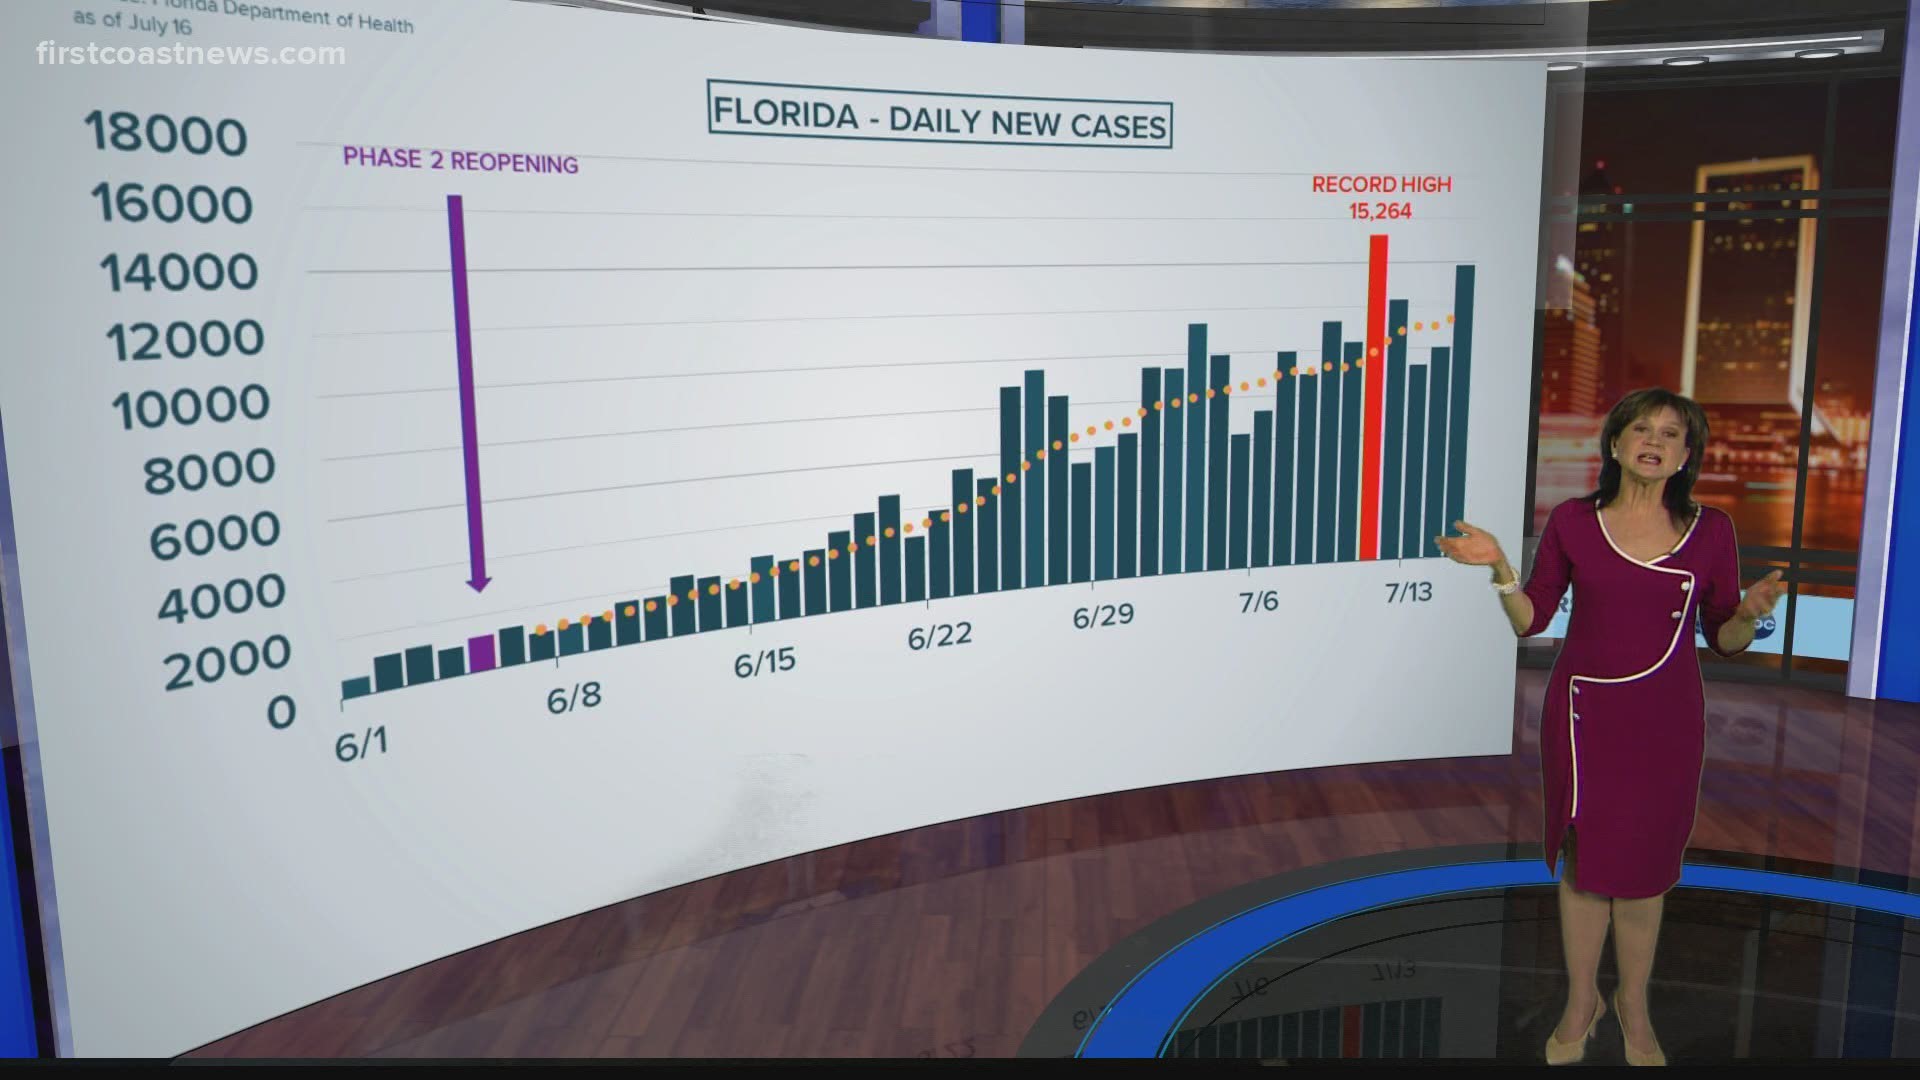 First Coast News breaks down the latest curve in coronavirus cases as of July 16. Right now the trend seems to be going upward.